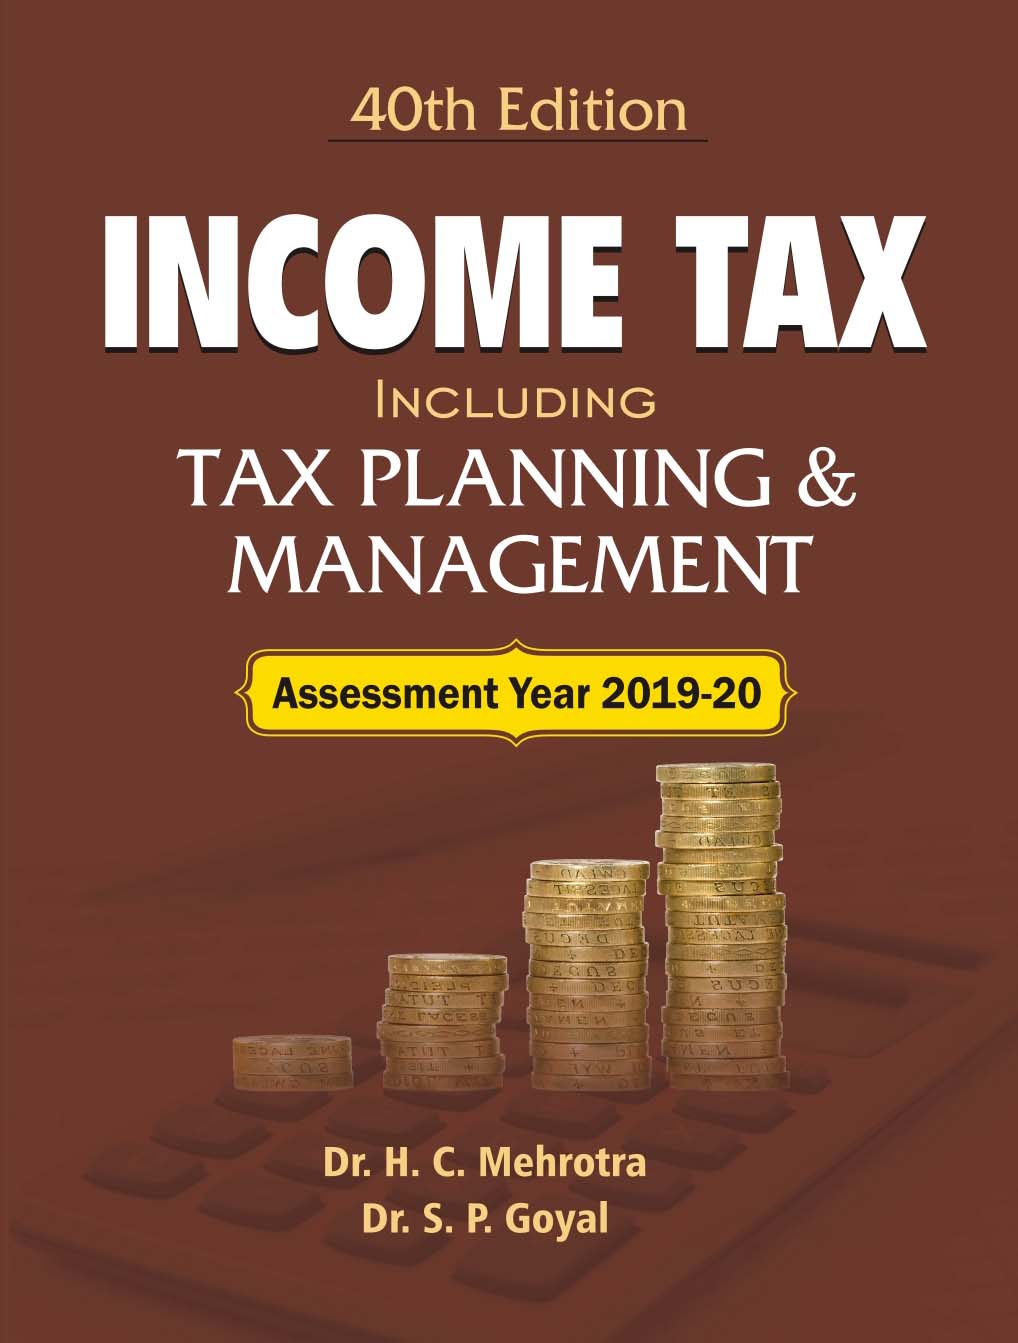 Tax including Tax Planning & Management Book AY 202021